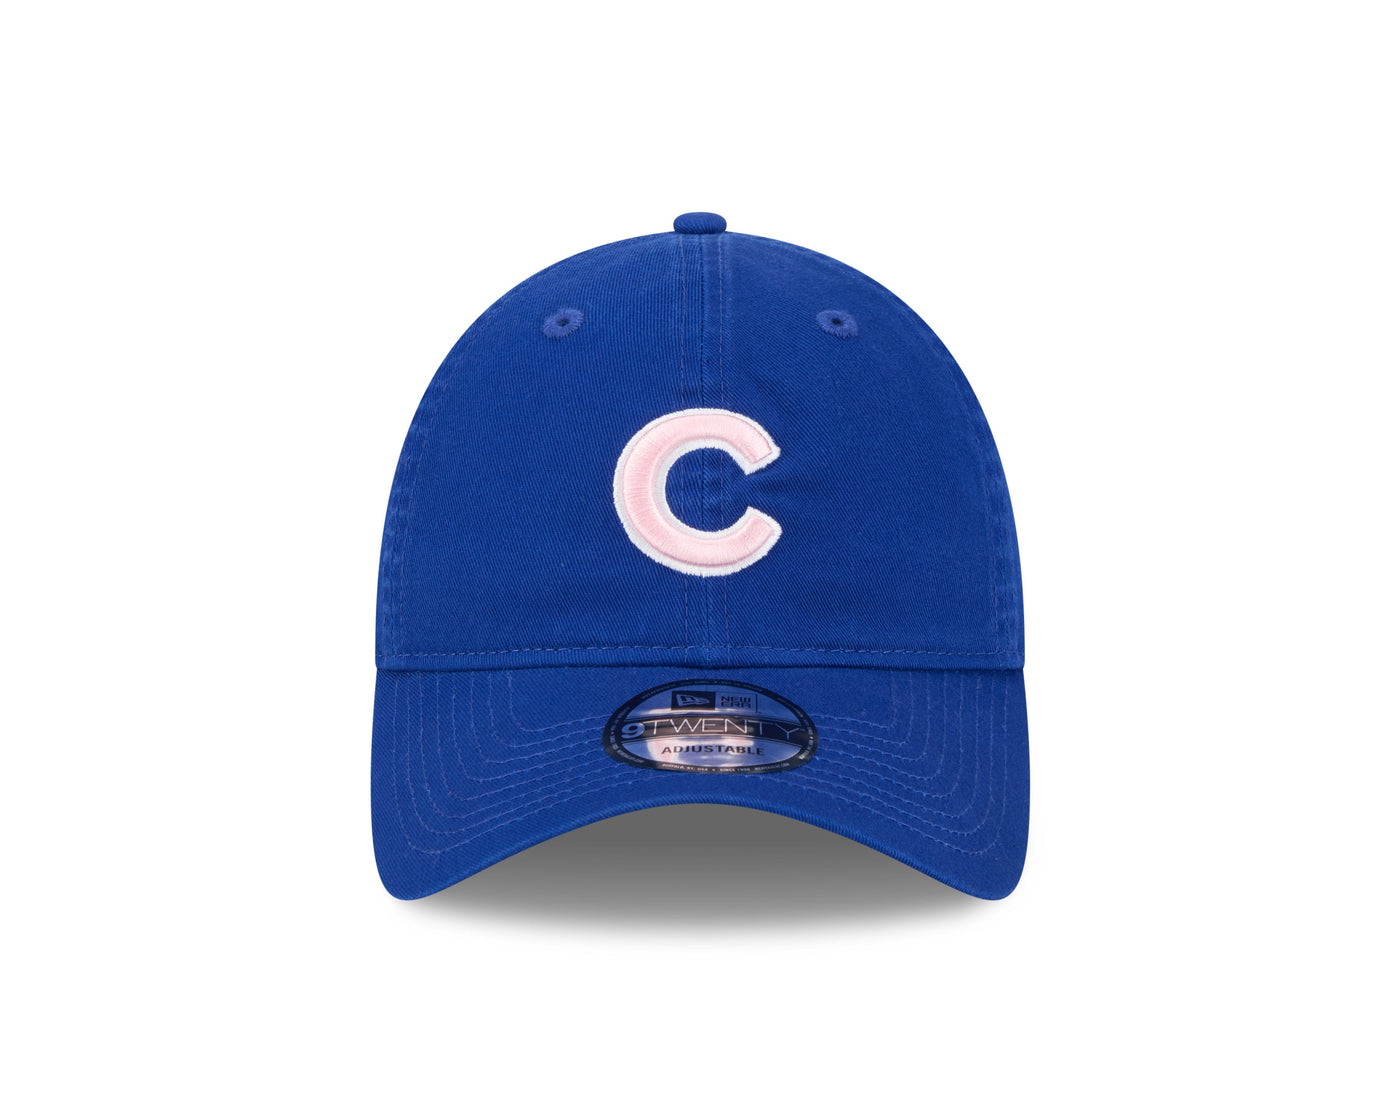 CHICAGO CUBS NEW ERA YOUTH MOTHER'S DAY CAP